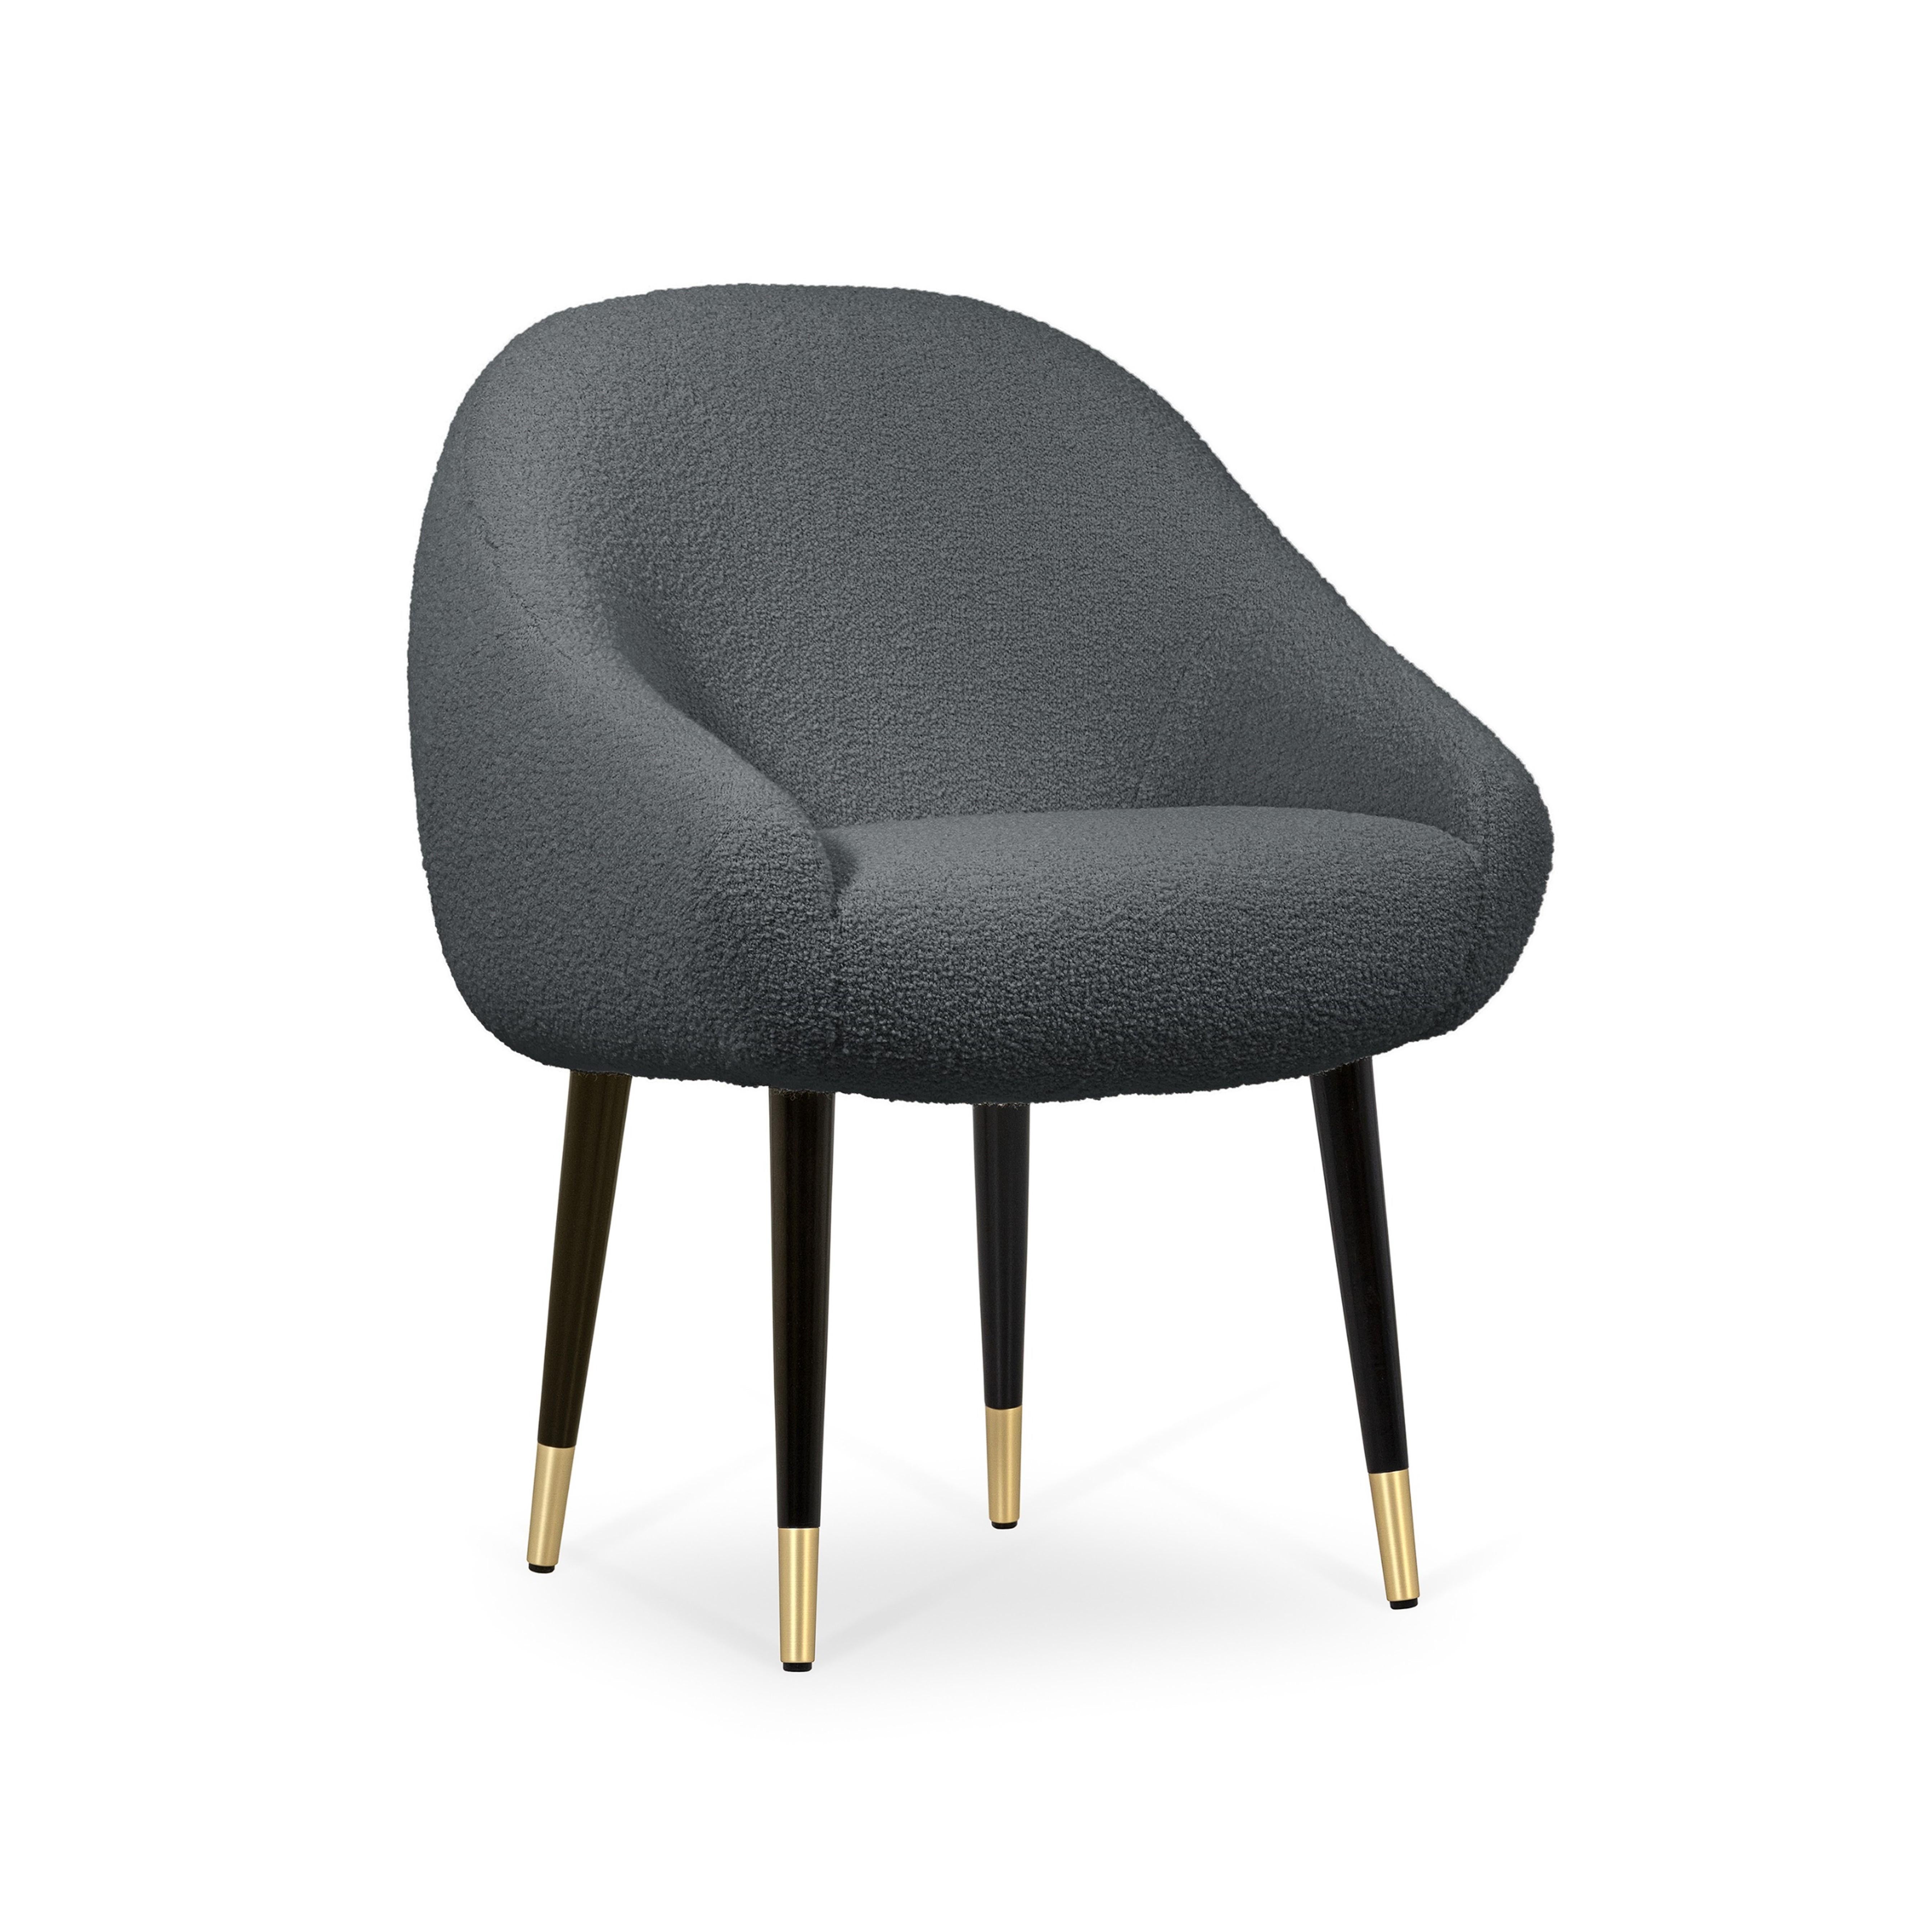 The Niemeyer dining chair is named after the Brazilian Architect Oscar Niemeyer whose Architecture was spread like sculptural poetry in the History of humankind. The rounded lines of the chair are influenced by the remarkable 'Casa das Canoas'